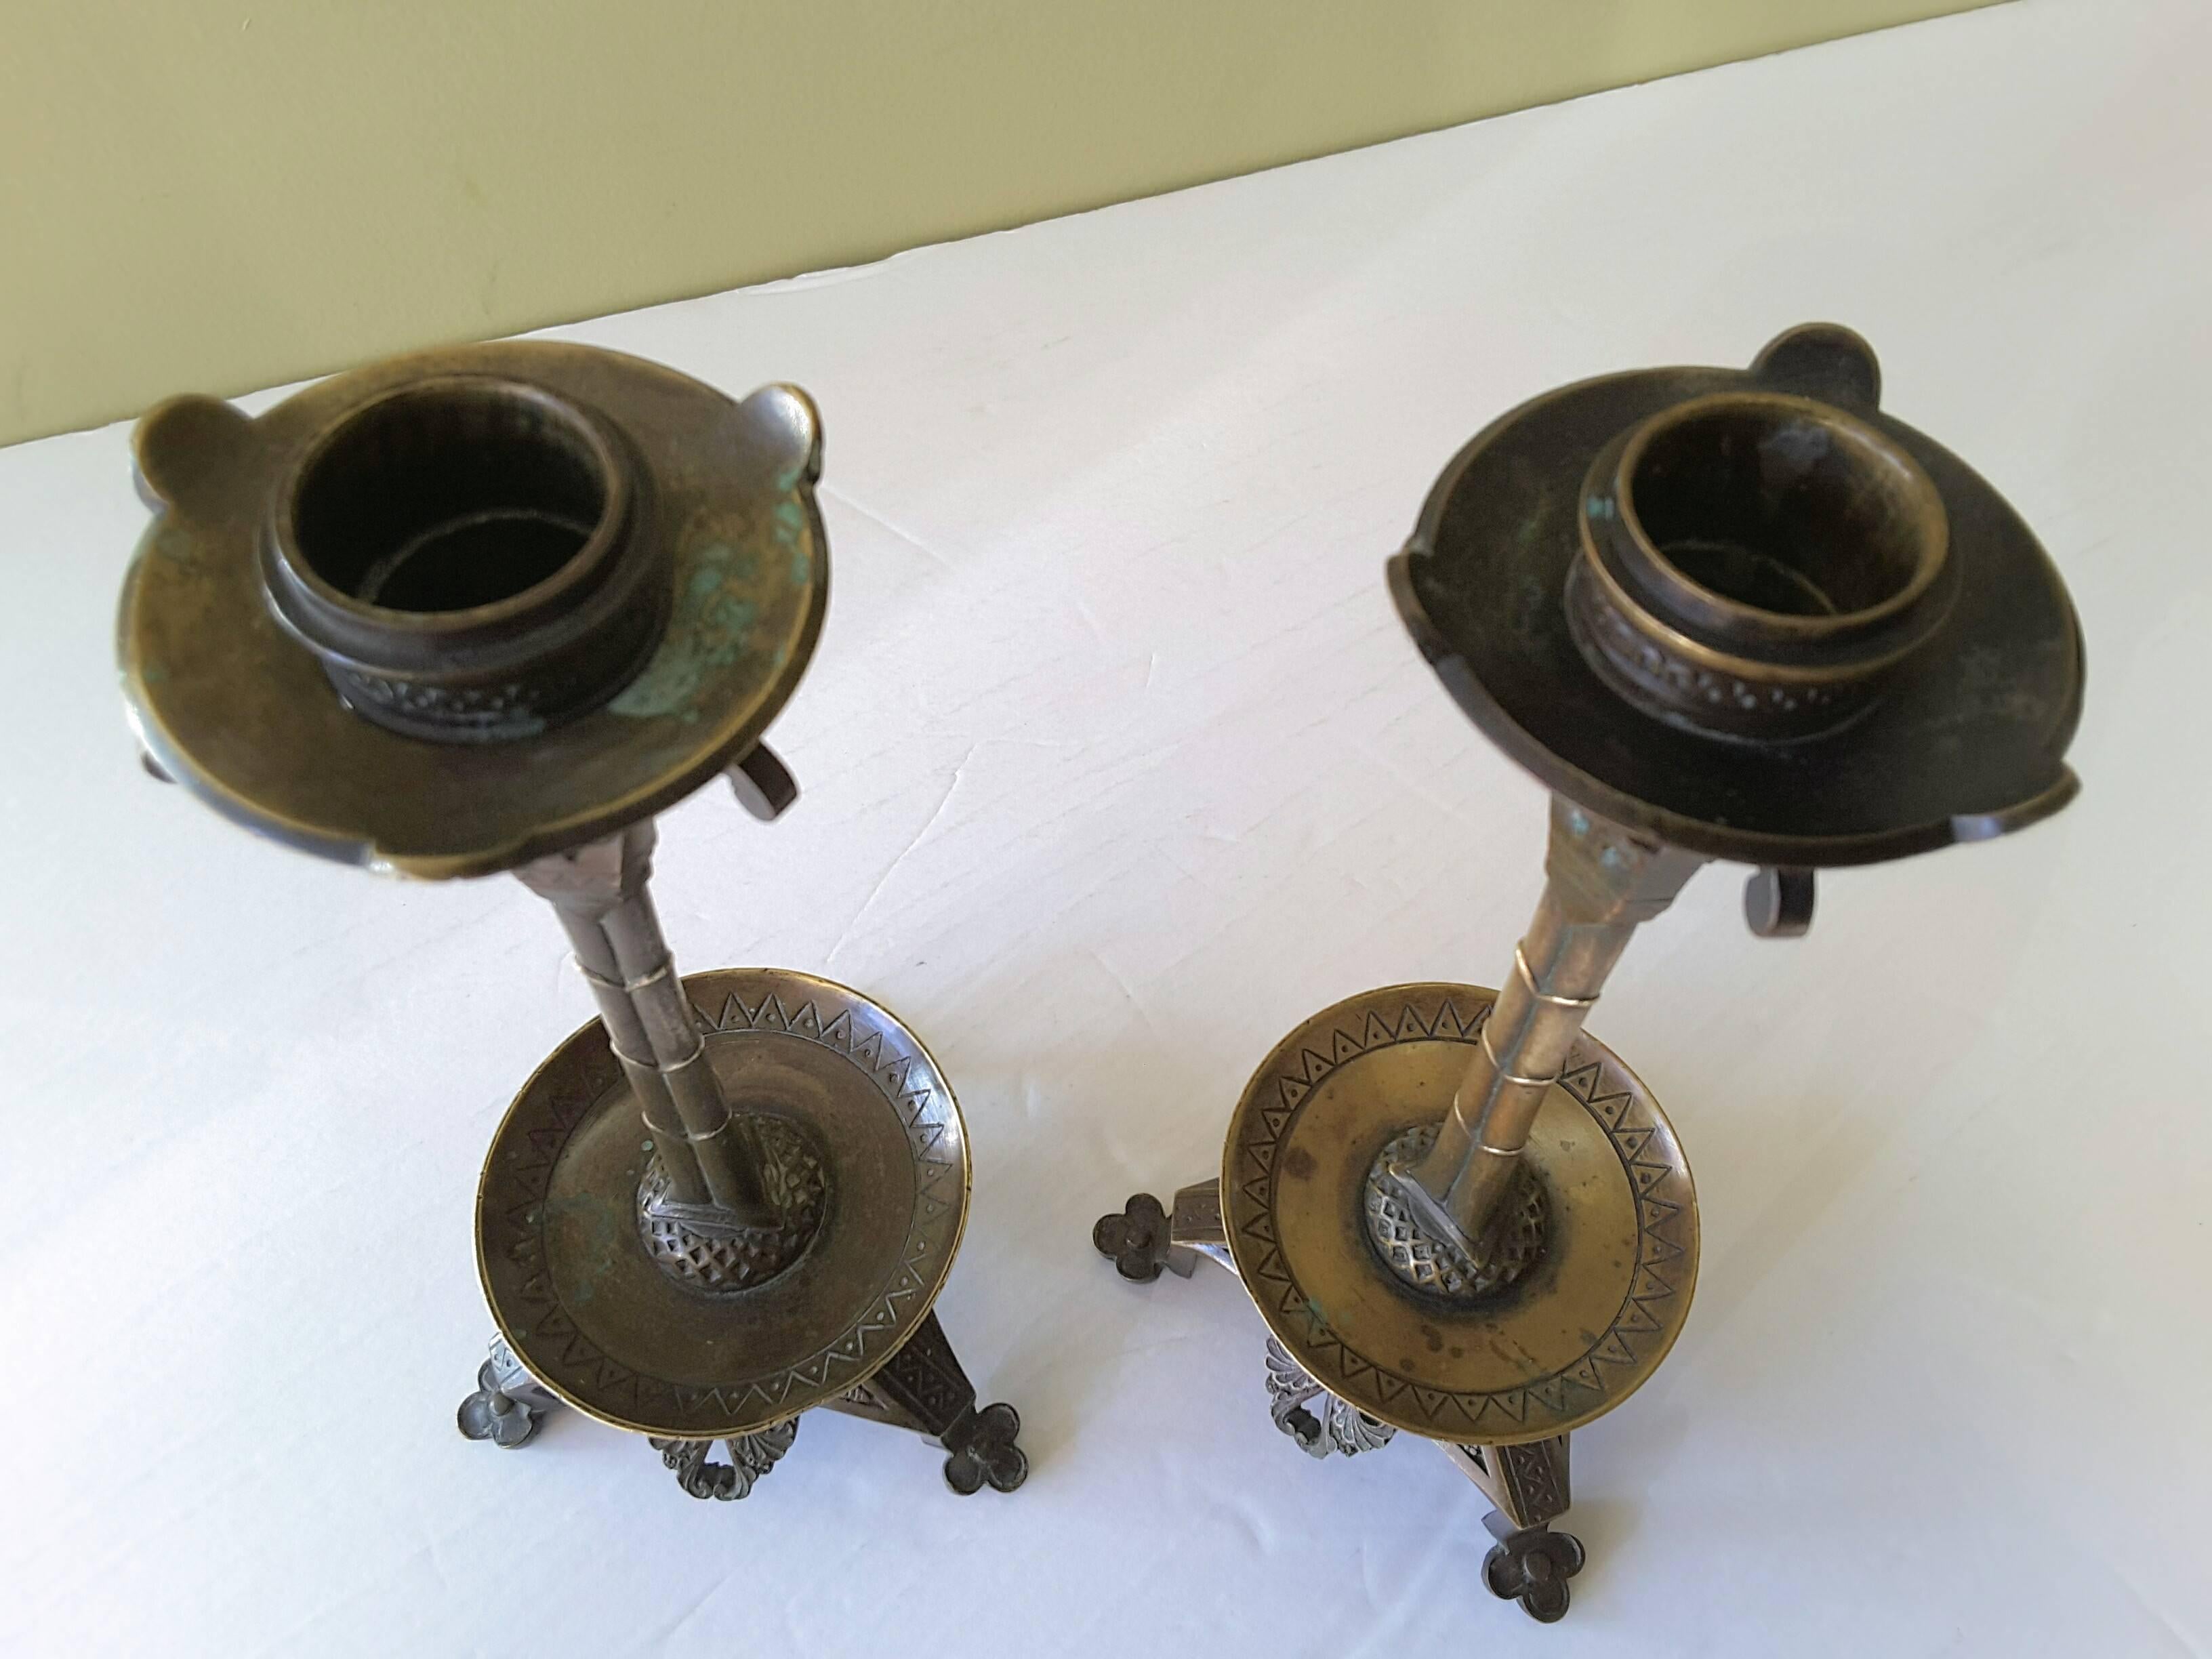 A pair of neo-gothic bronze candlesticks in the manner of Augustus Welby Northmore Pugin, finely cast in form of a gothic cluster column on a pierced tripod base. Aged patina with some verdigris. The candlesticks measure 8 1/4